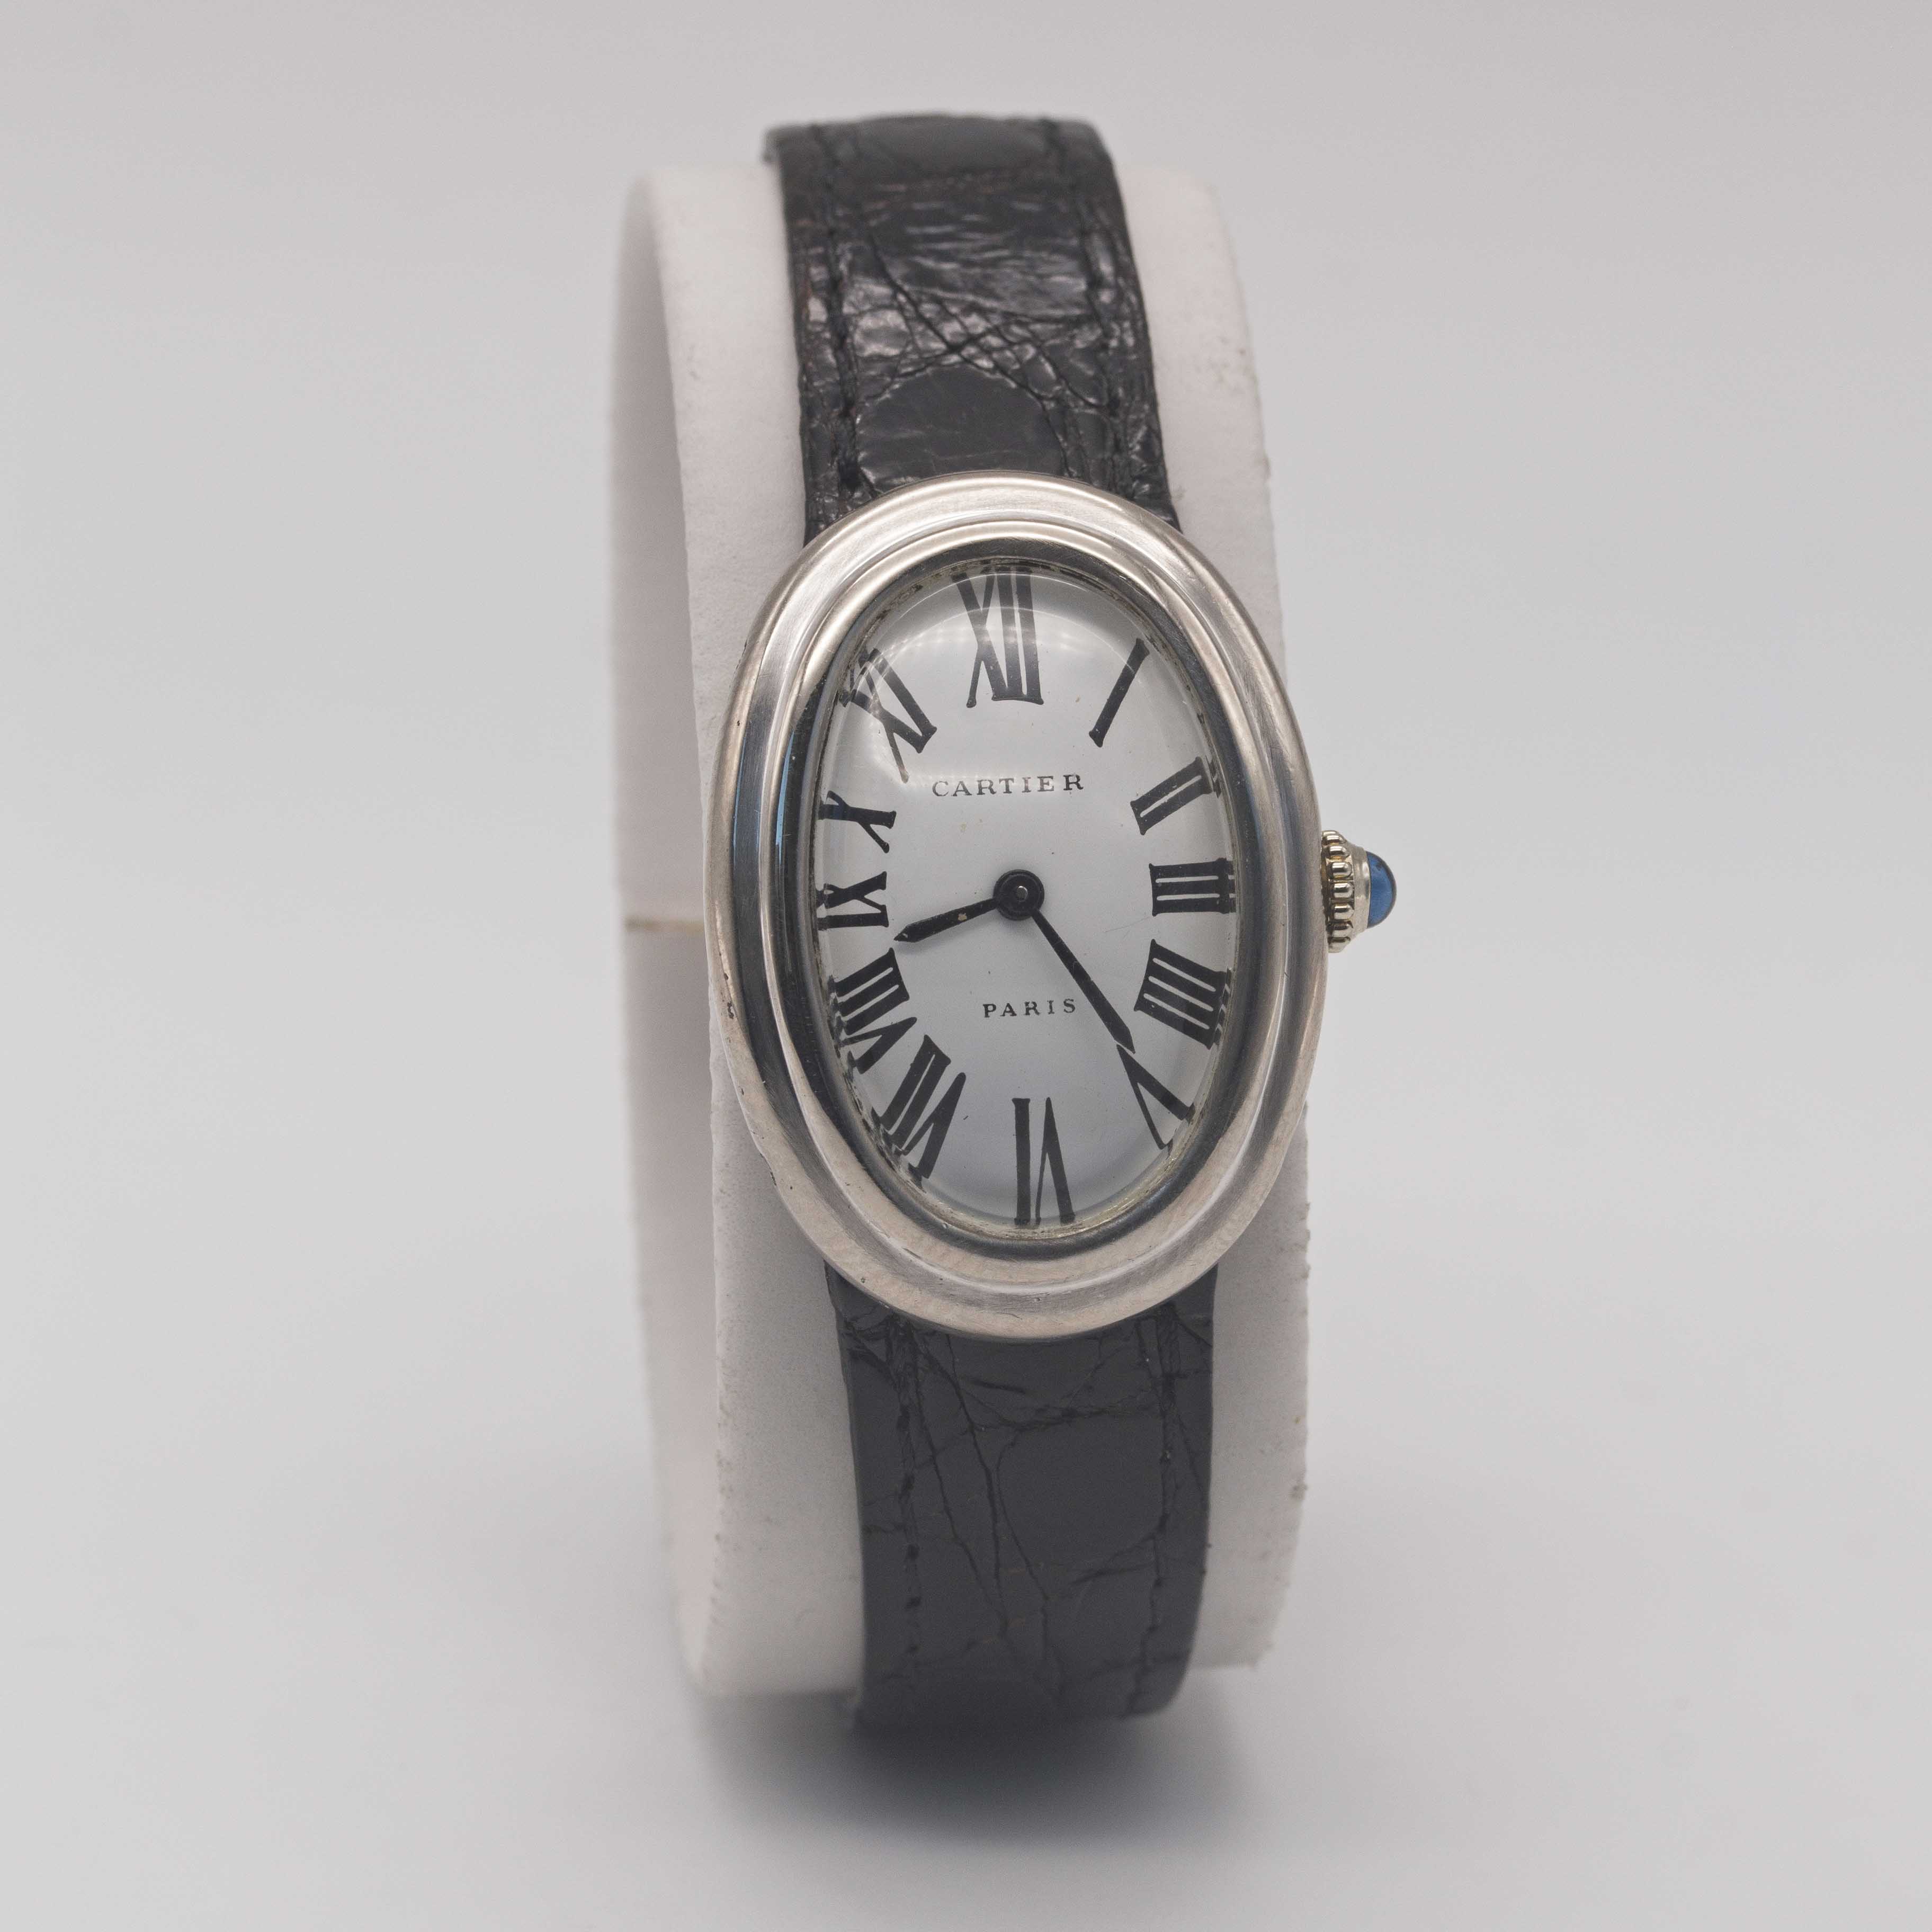 AN 18K SOLID WHITE GOLD CARTIER BAIGNOIRE WRIST WATCH CIRCA 1980s Movement: 17J, manual wind, signed - Image 5 of 14